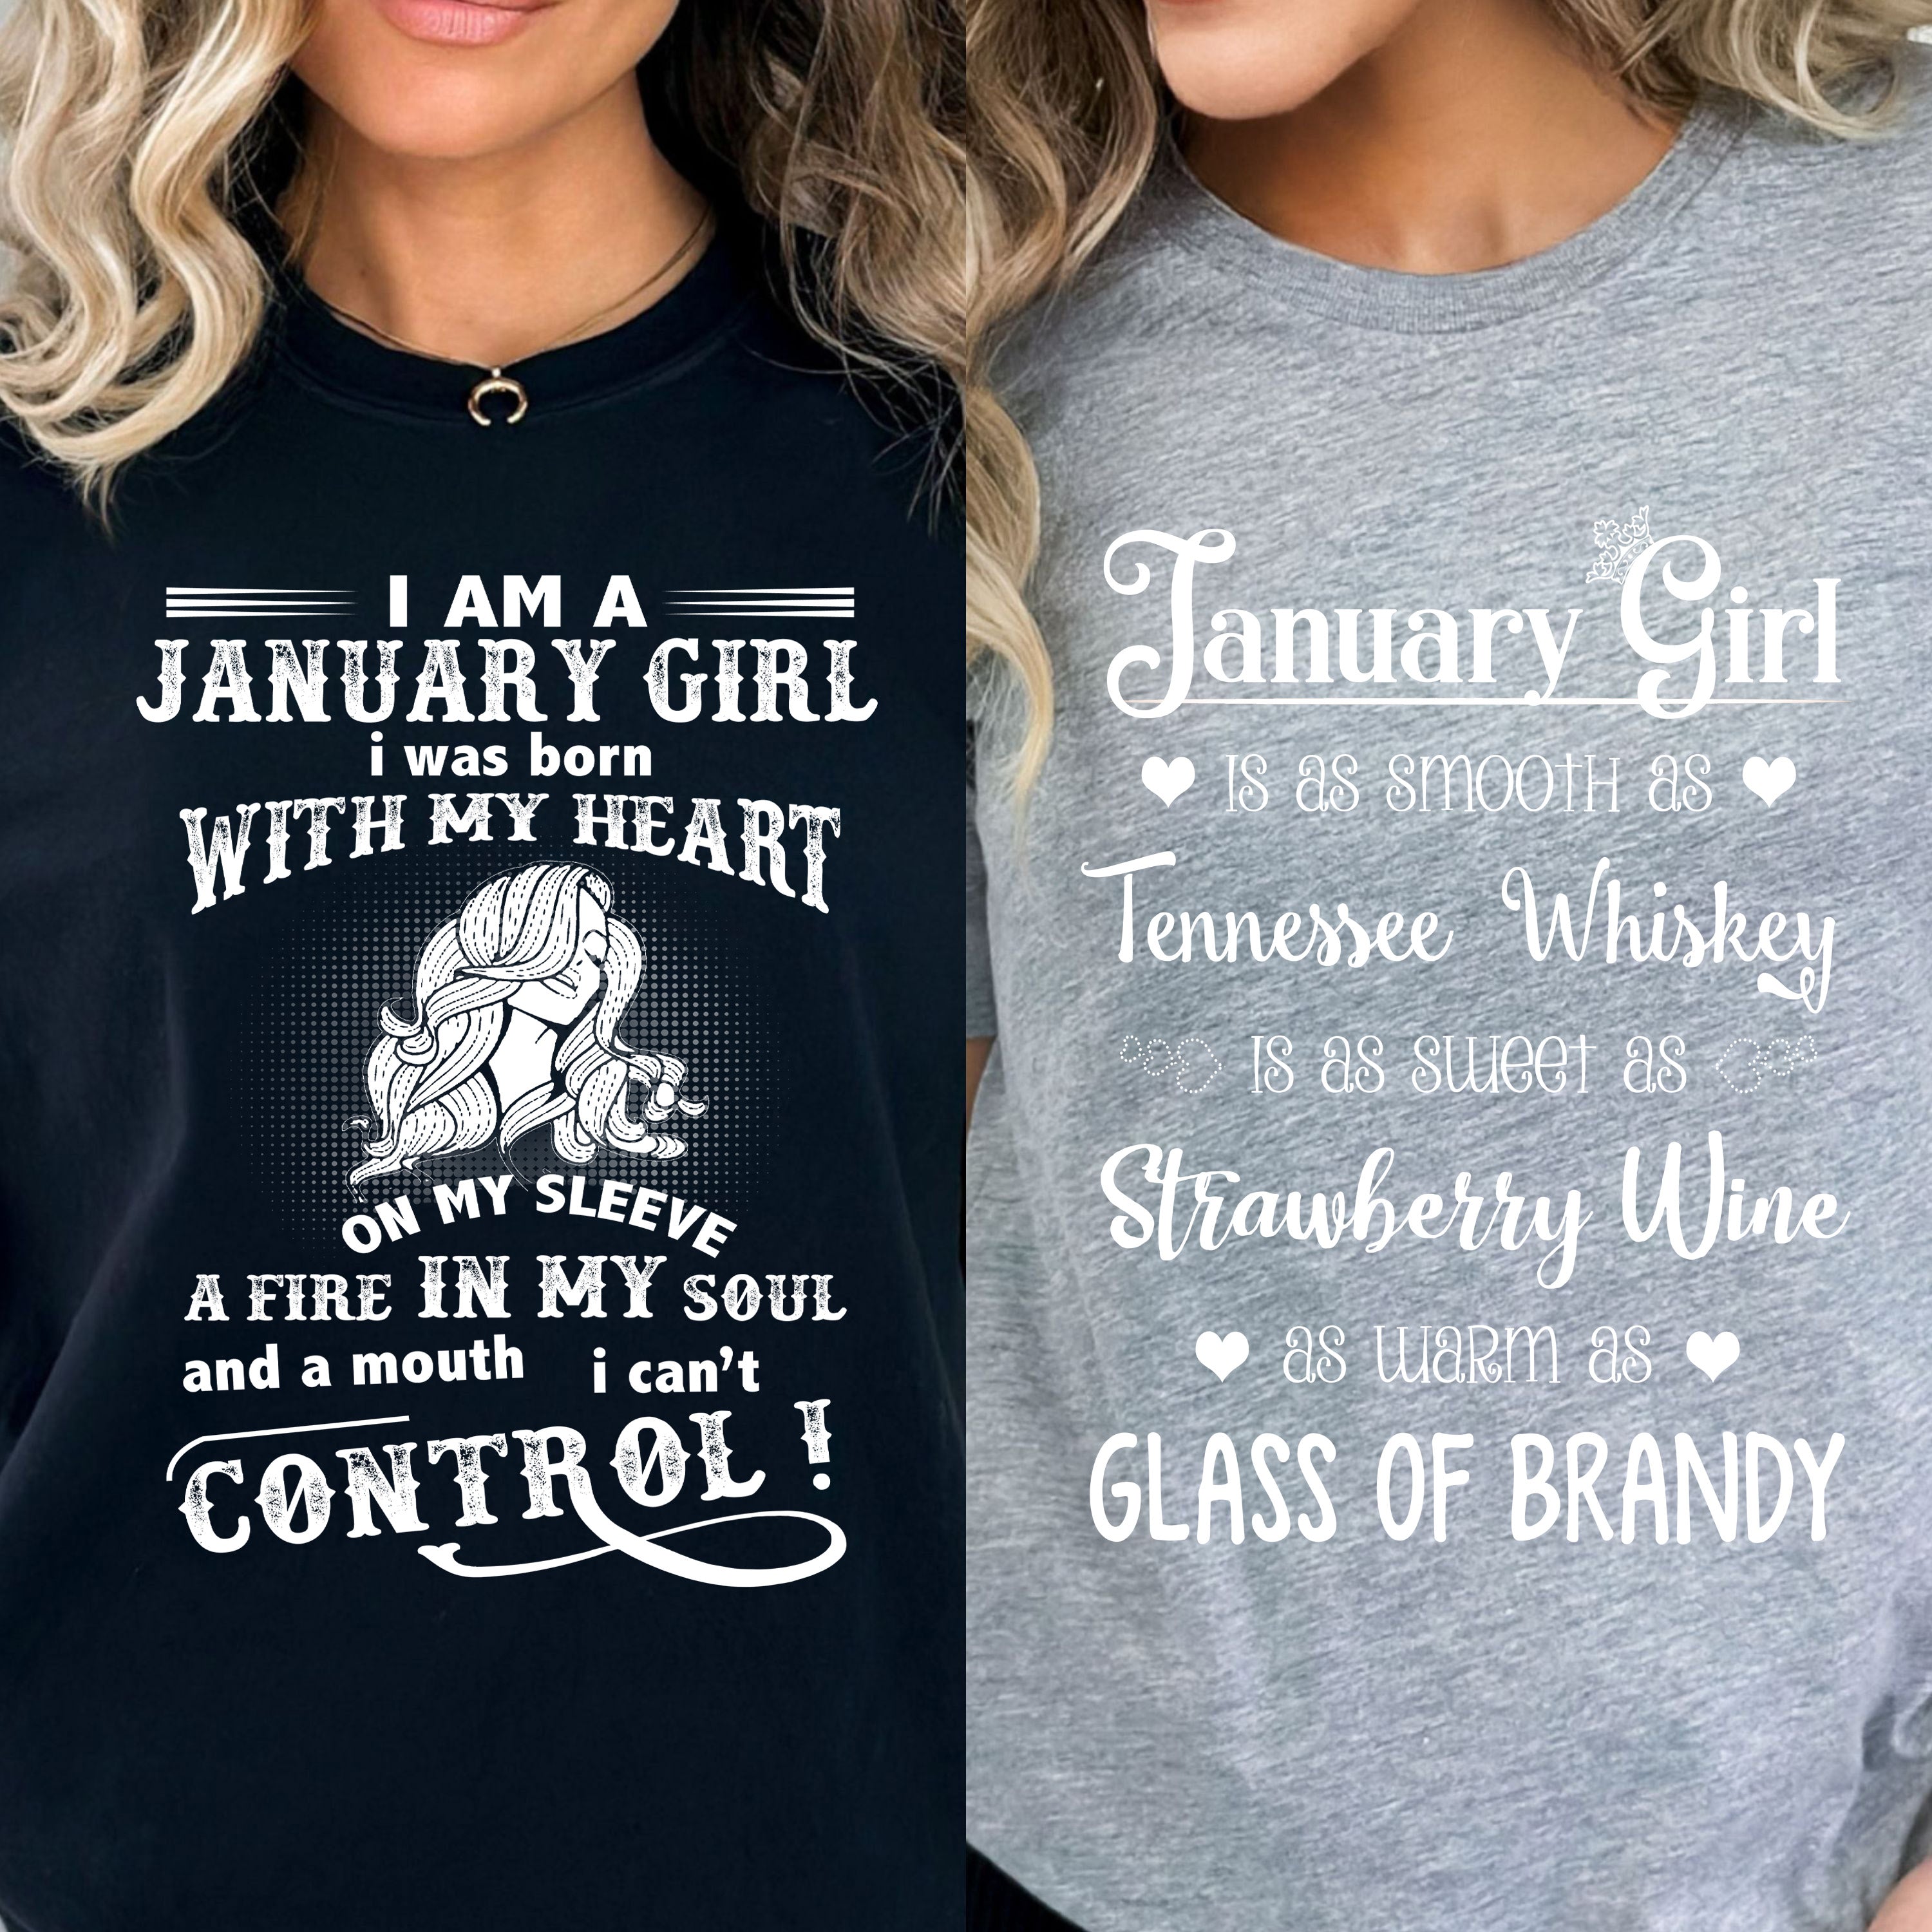 "January Whiskey + Control -Pack of 2".